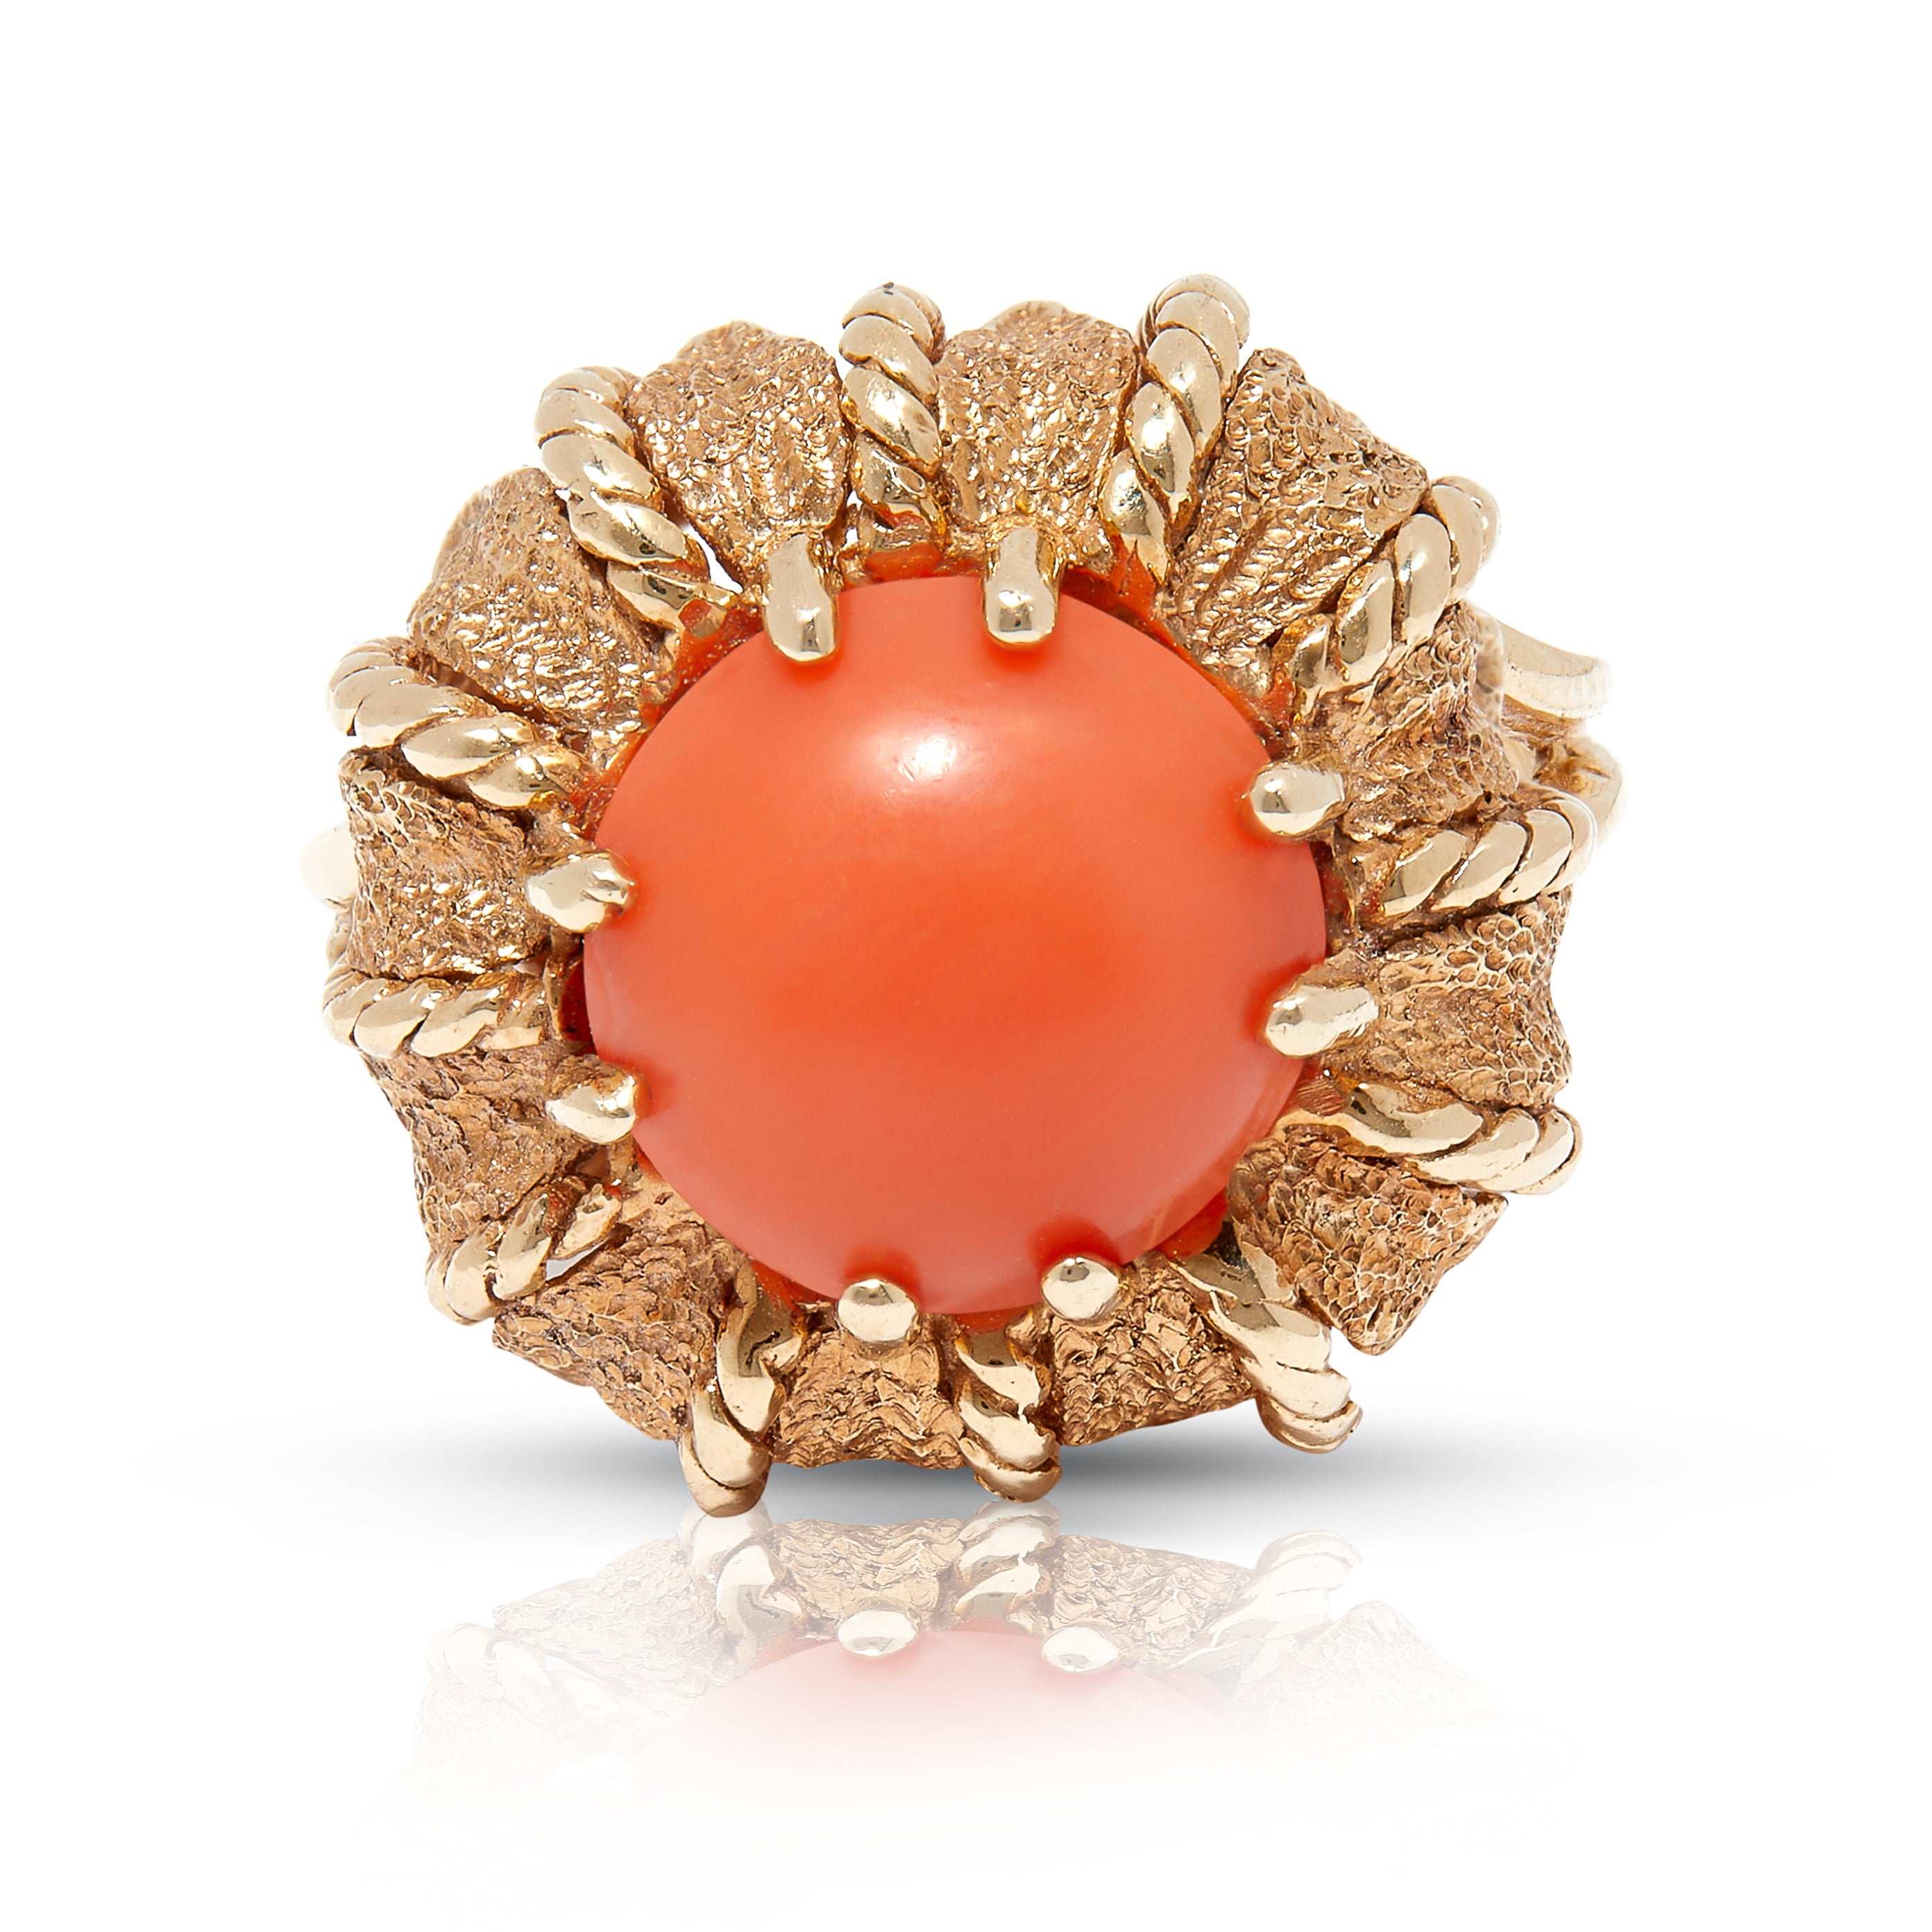 1960s-1970s gold coral ring with interchangeable leaf and braided textures.